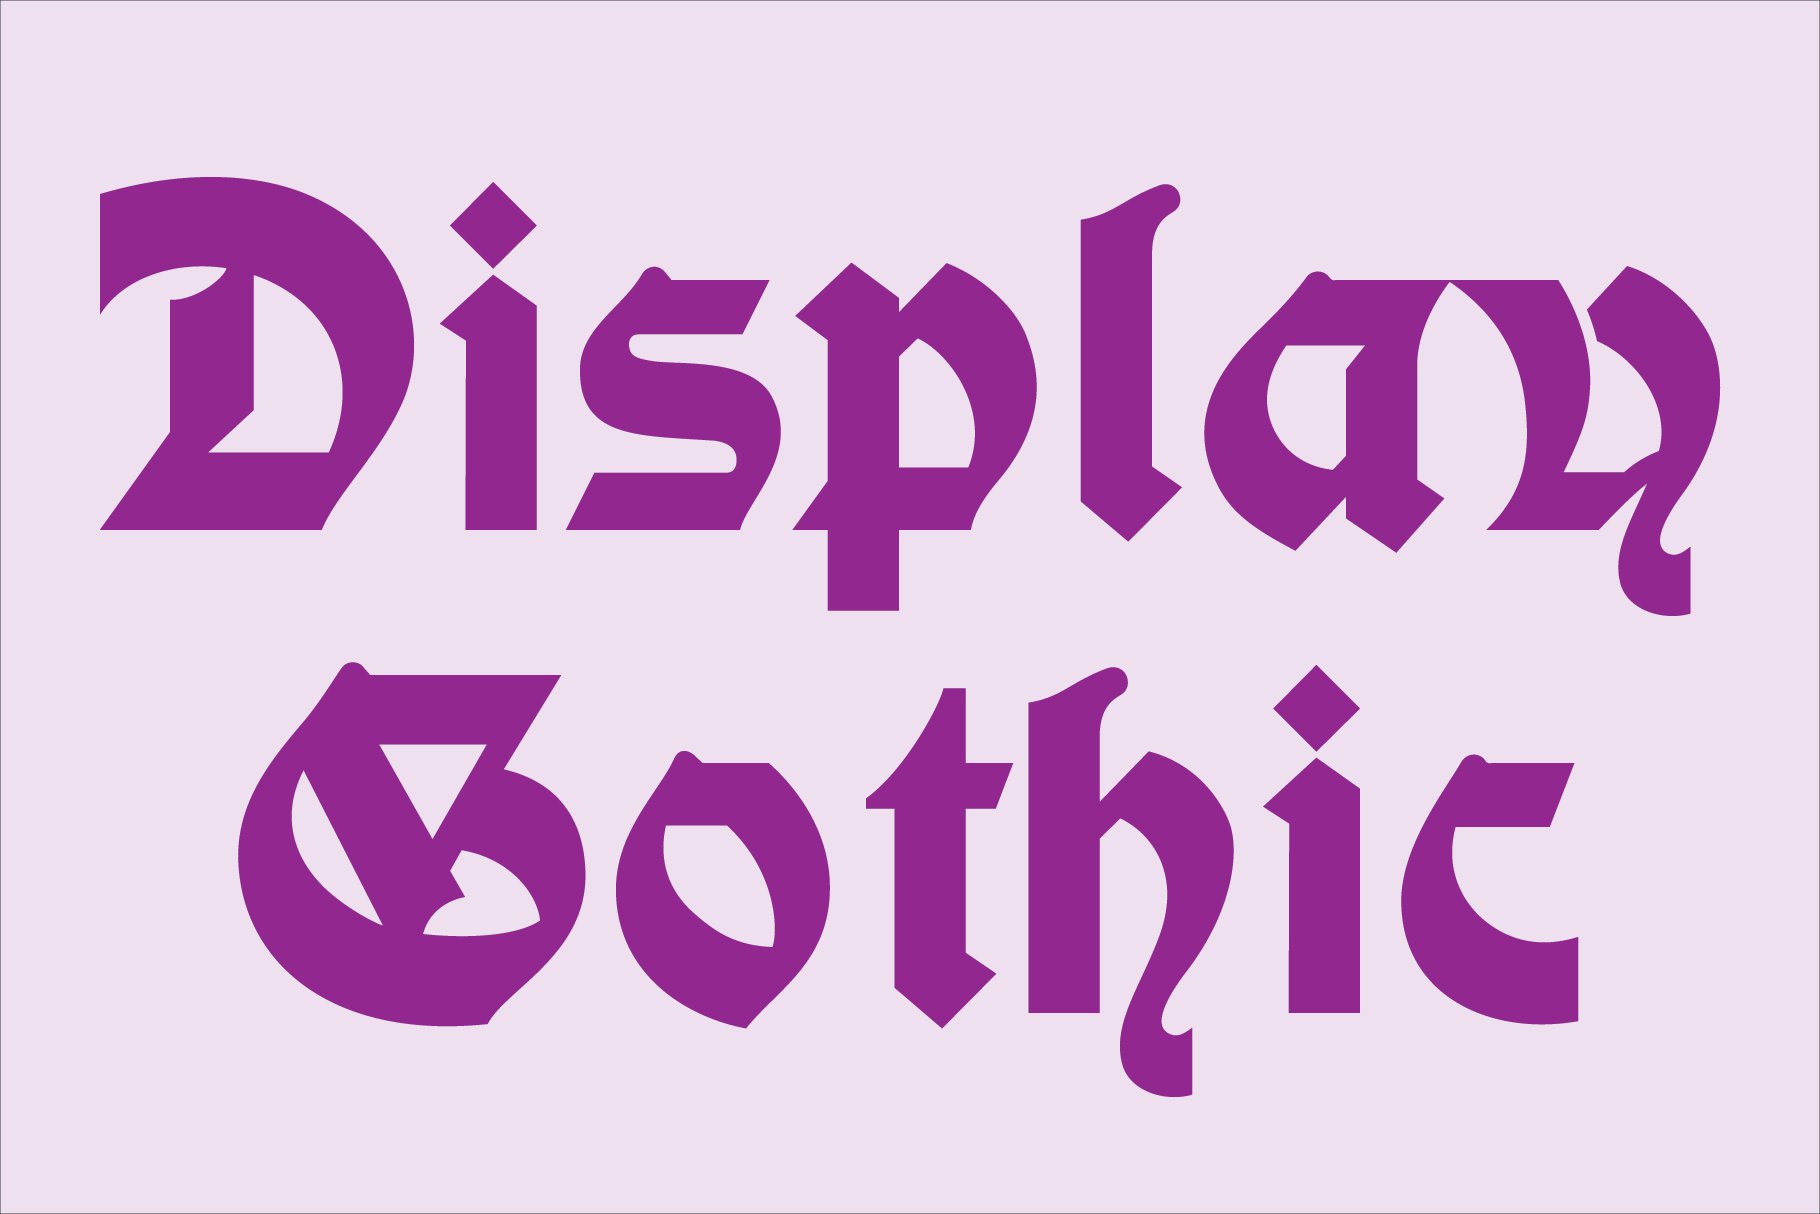 Display Gothic Font cover image.